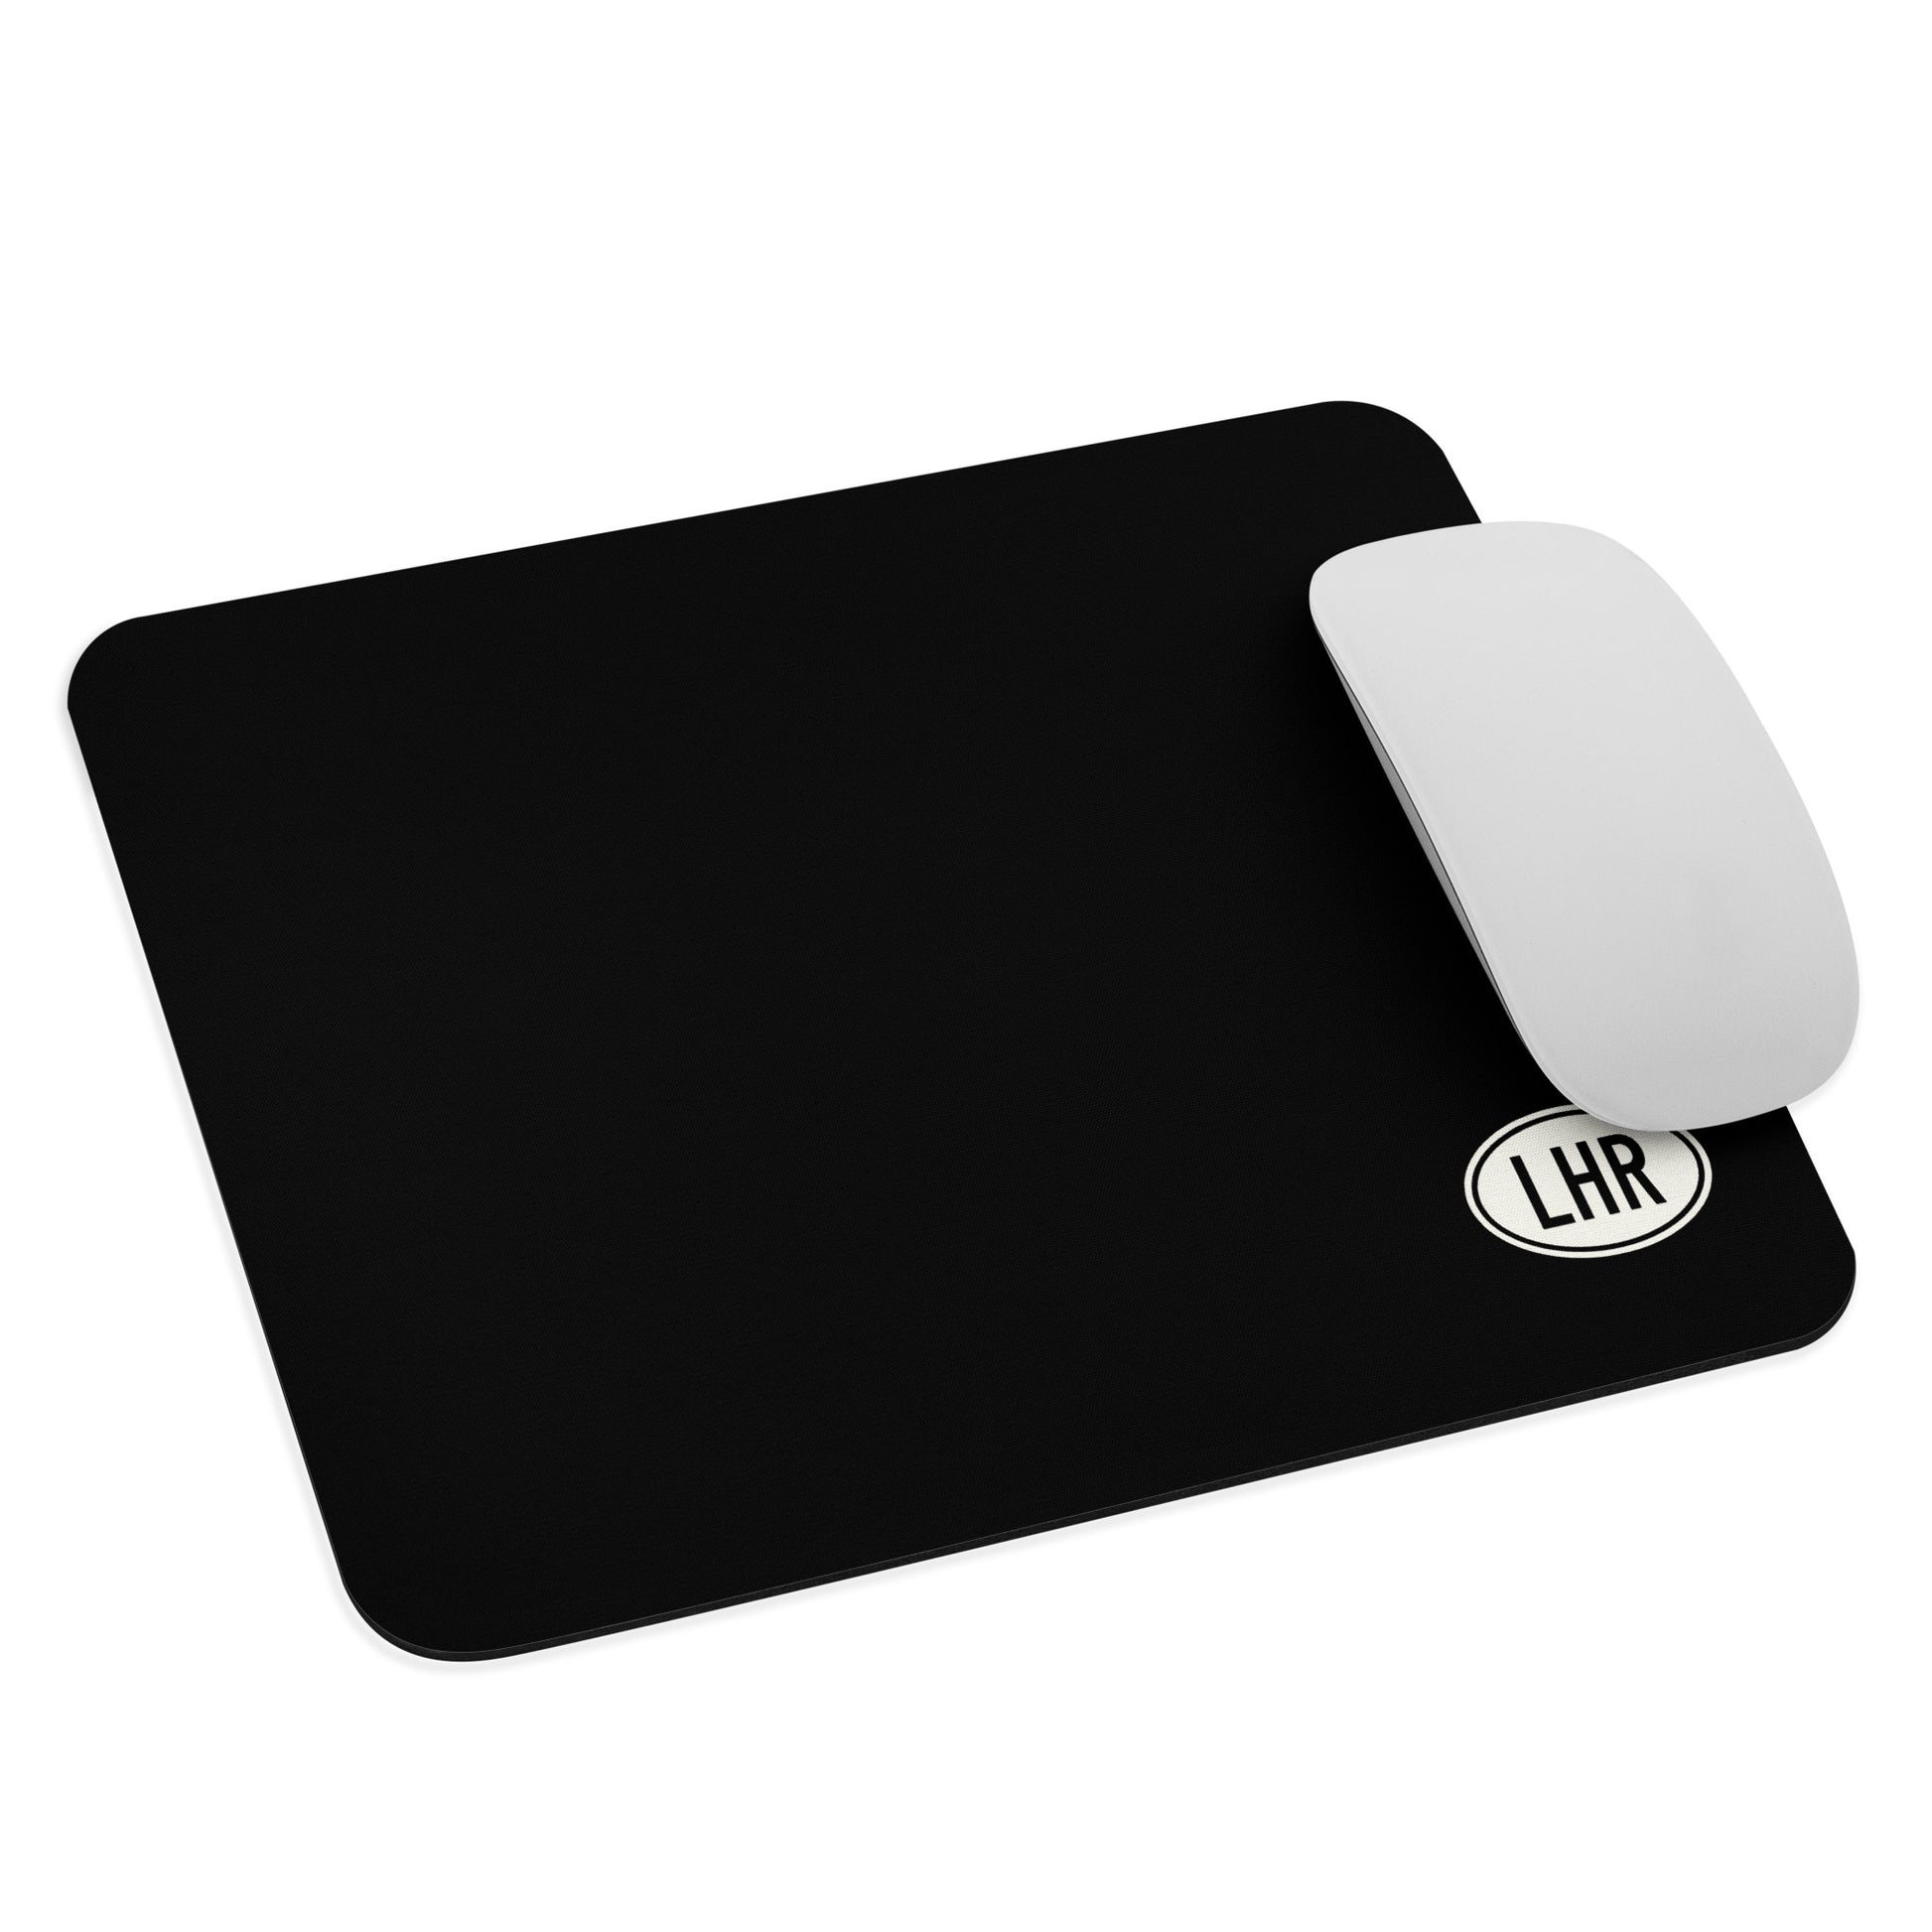 Unique Travel Gift Mouse Pad - White Oval • LHR London • YHM Designs - Image 03